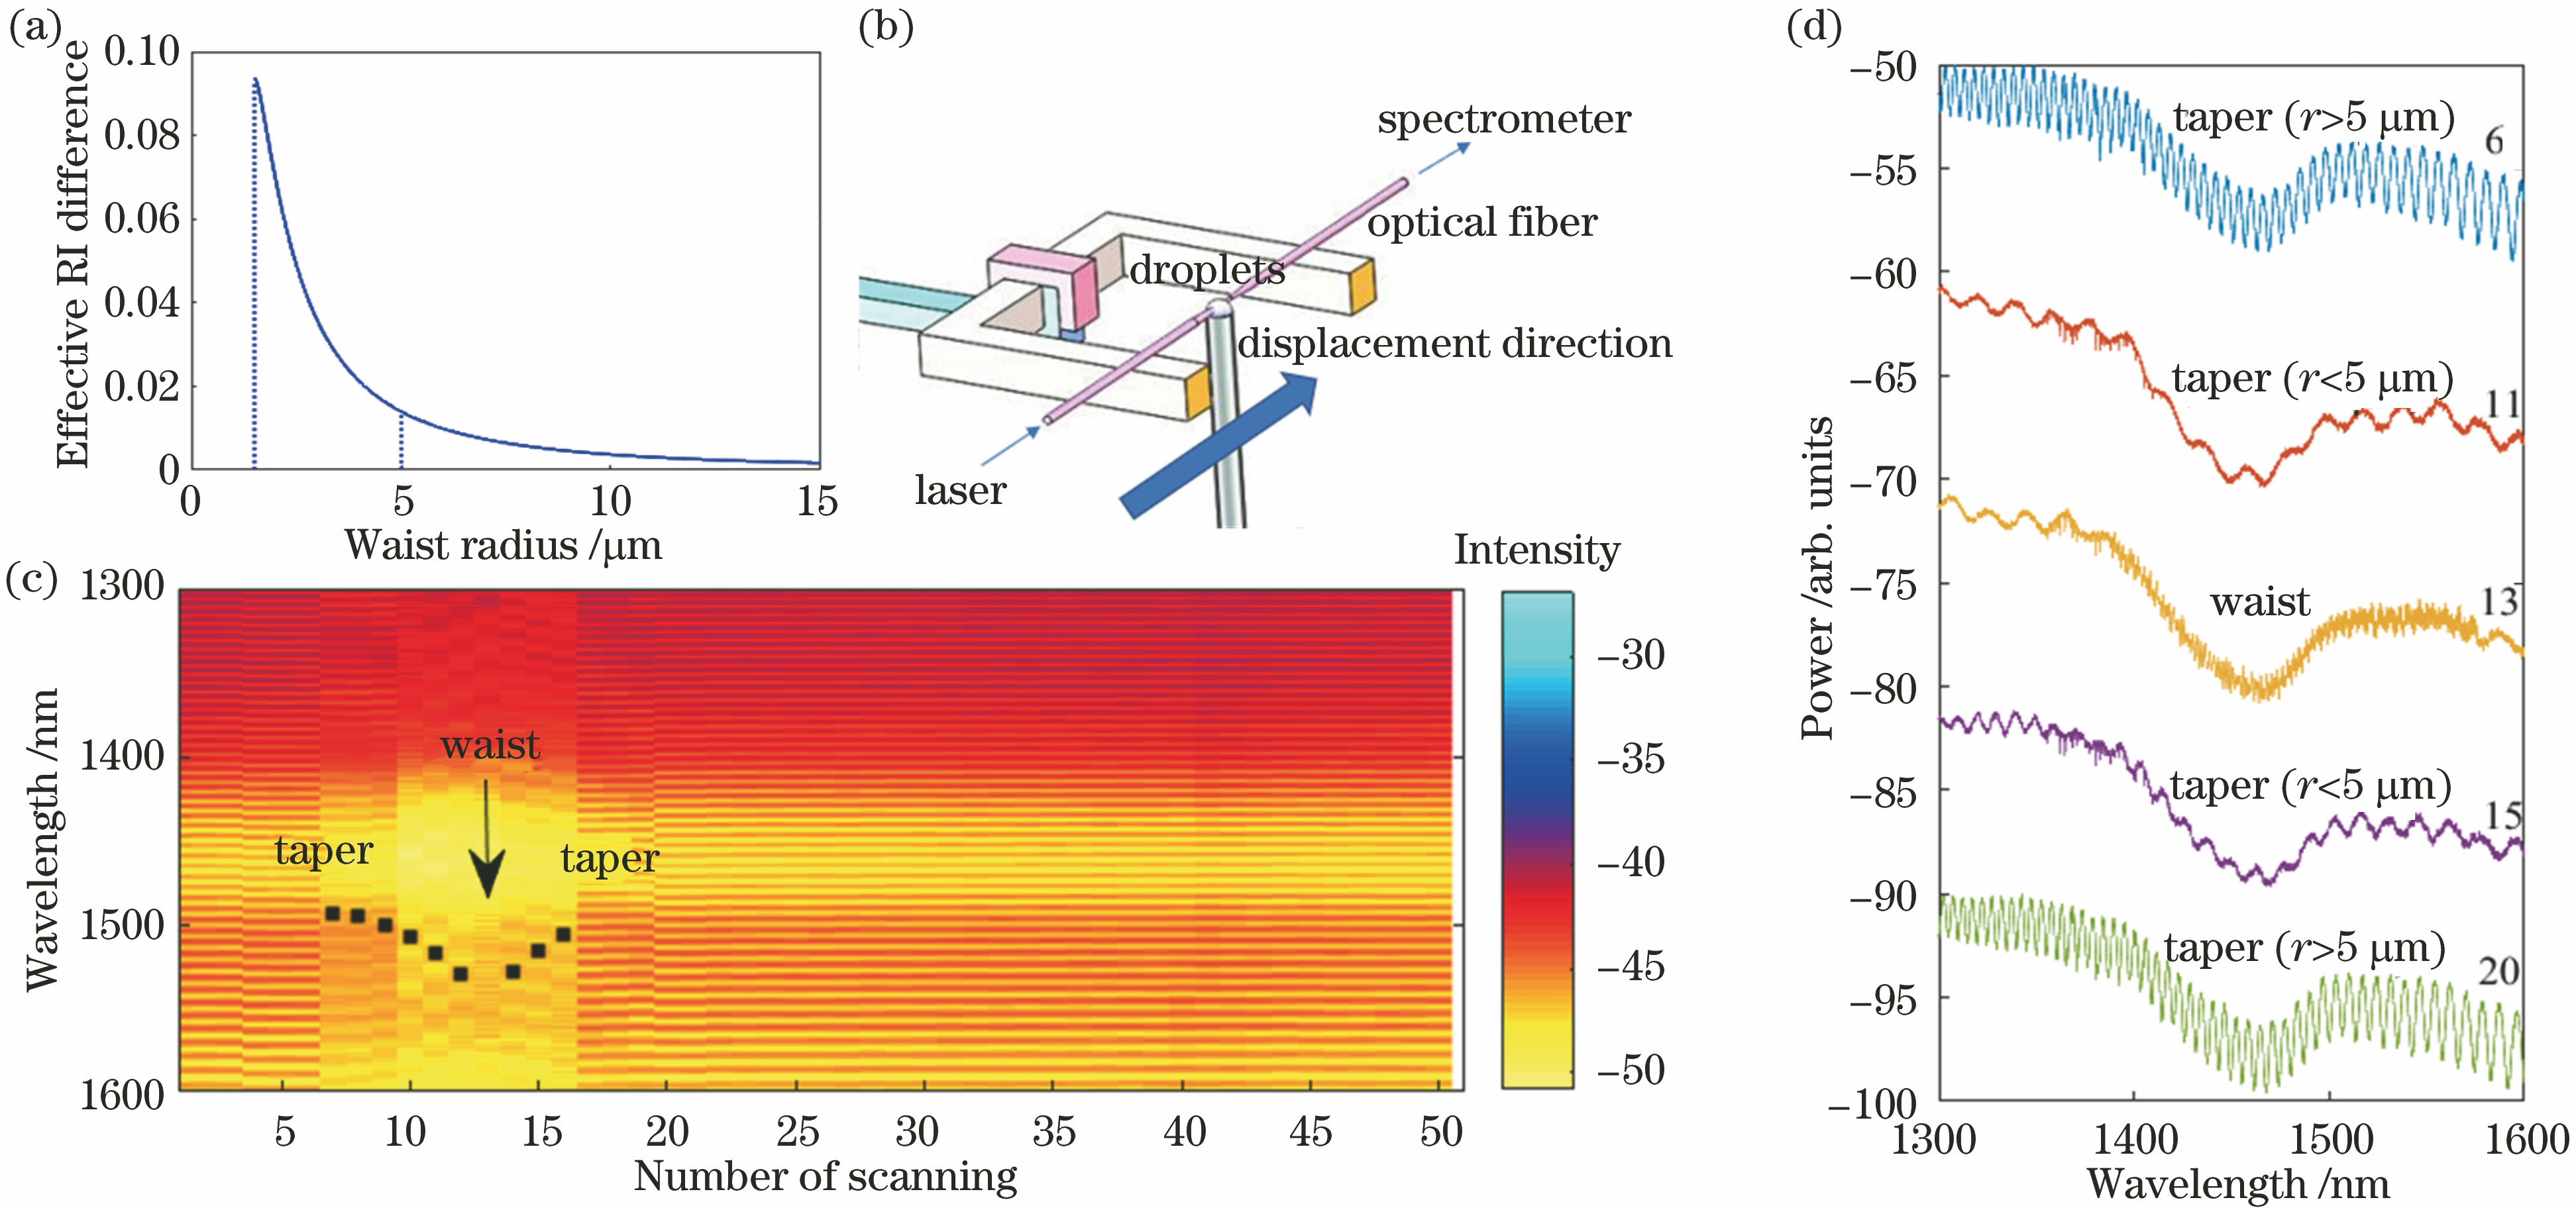 Interference spectrum changes during scanning. (a) Variation curve of effective refractive index difference for different radius; (b) schematic diagram of droplet scanning experimental device of tapered micro/nano fiber; (c) change of relative light intensity for 50 spectral scans; (d) interference spectra in scanning process